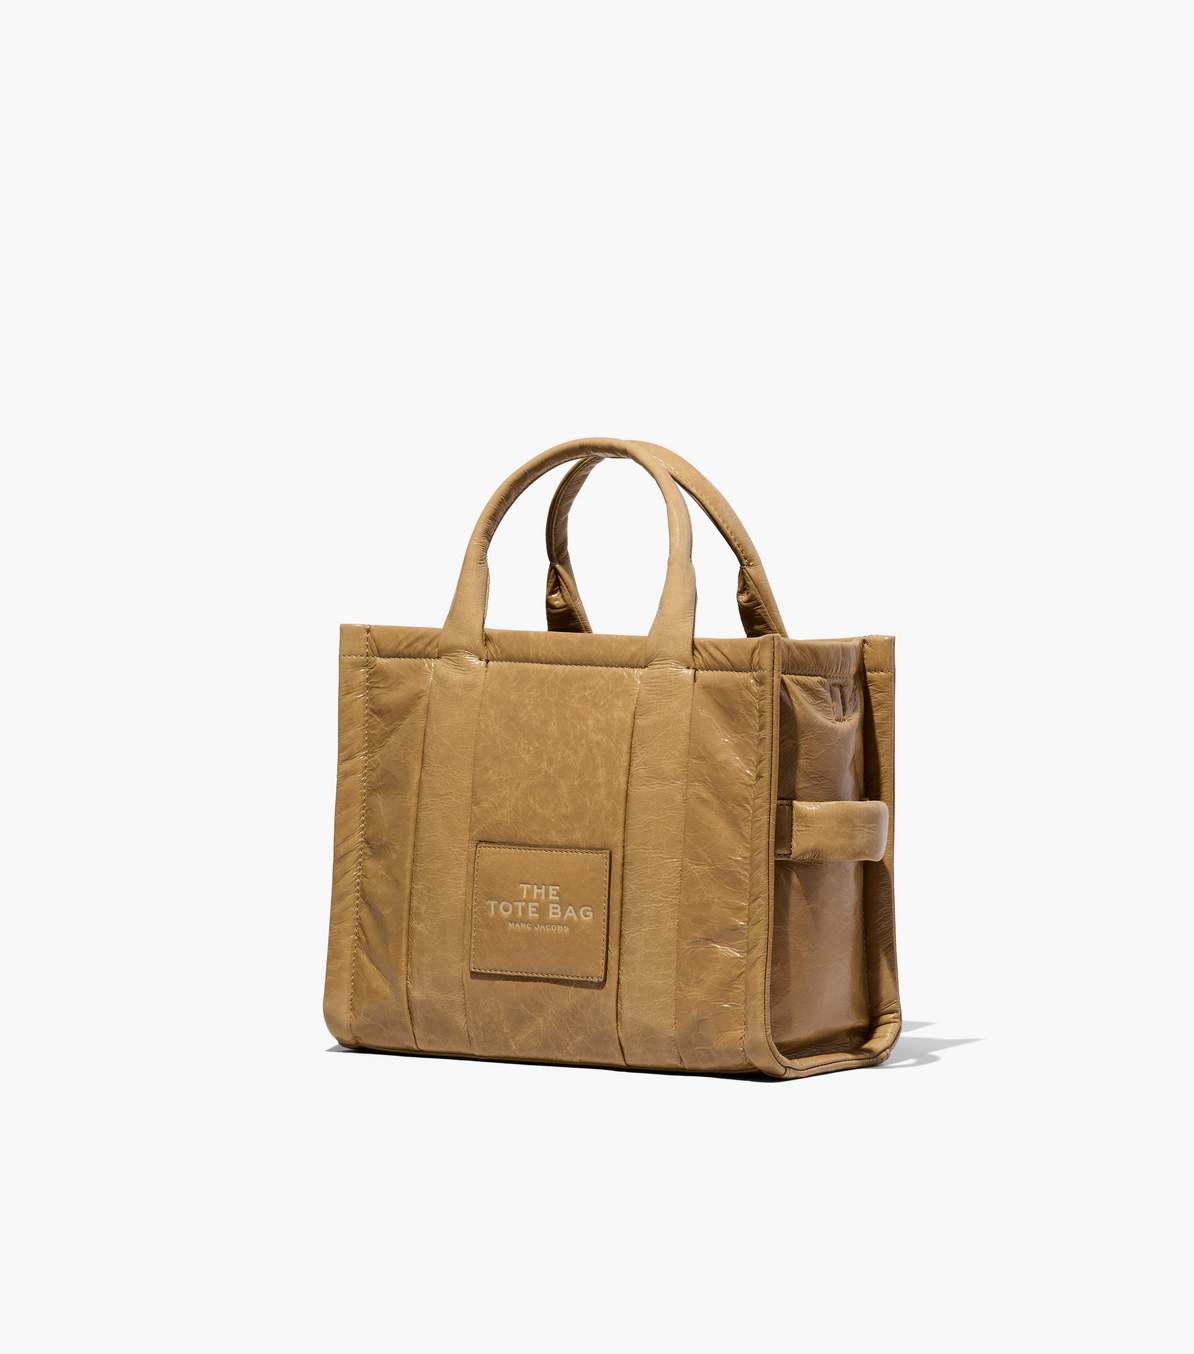 The Shiny Crinkle Medium Tote Bag | Marc Jacobs | Official Site